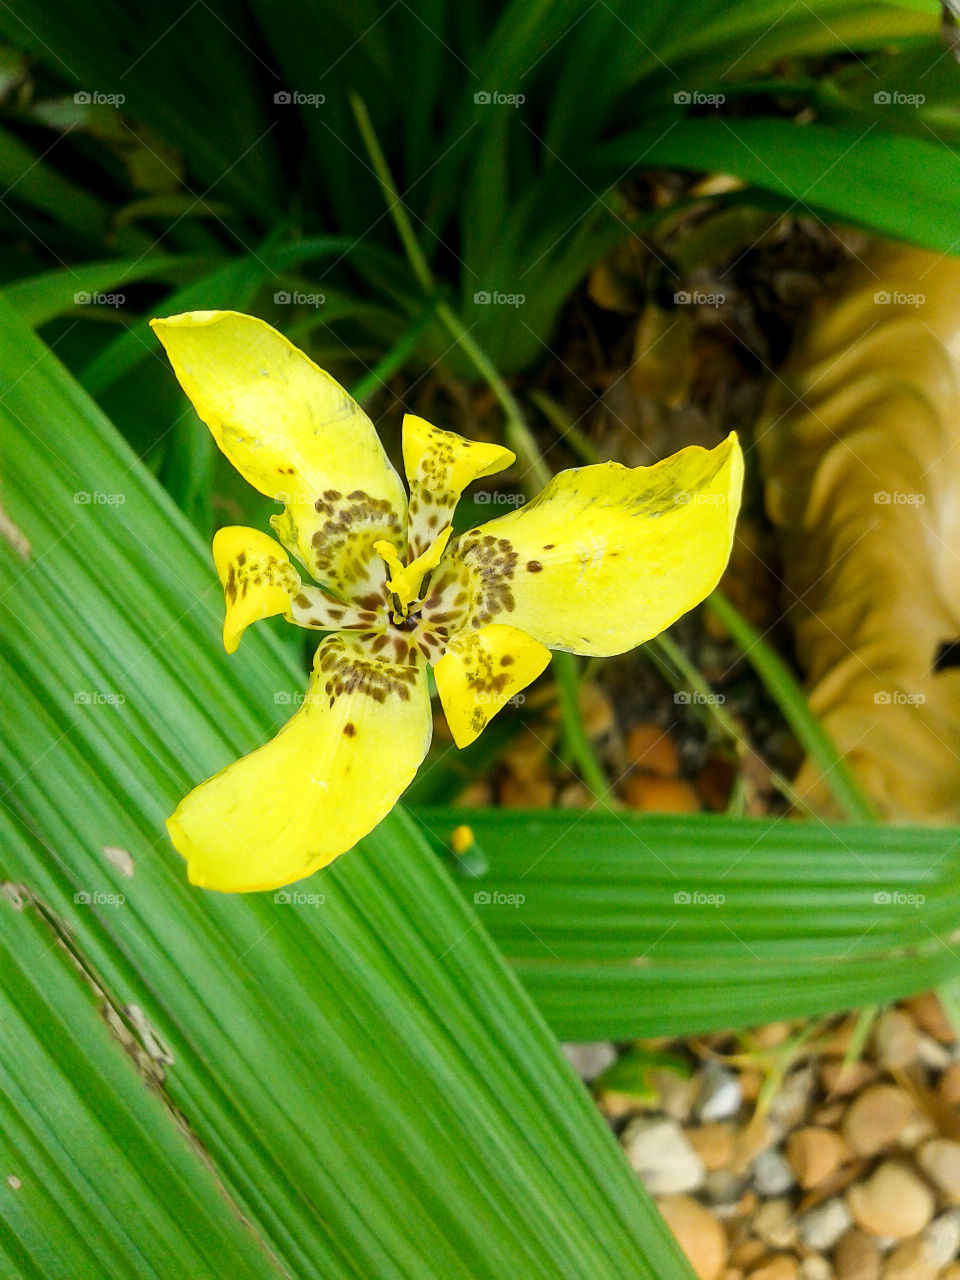 spotted yellow flower.